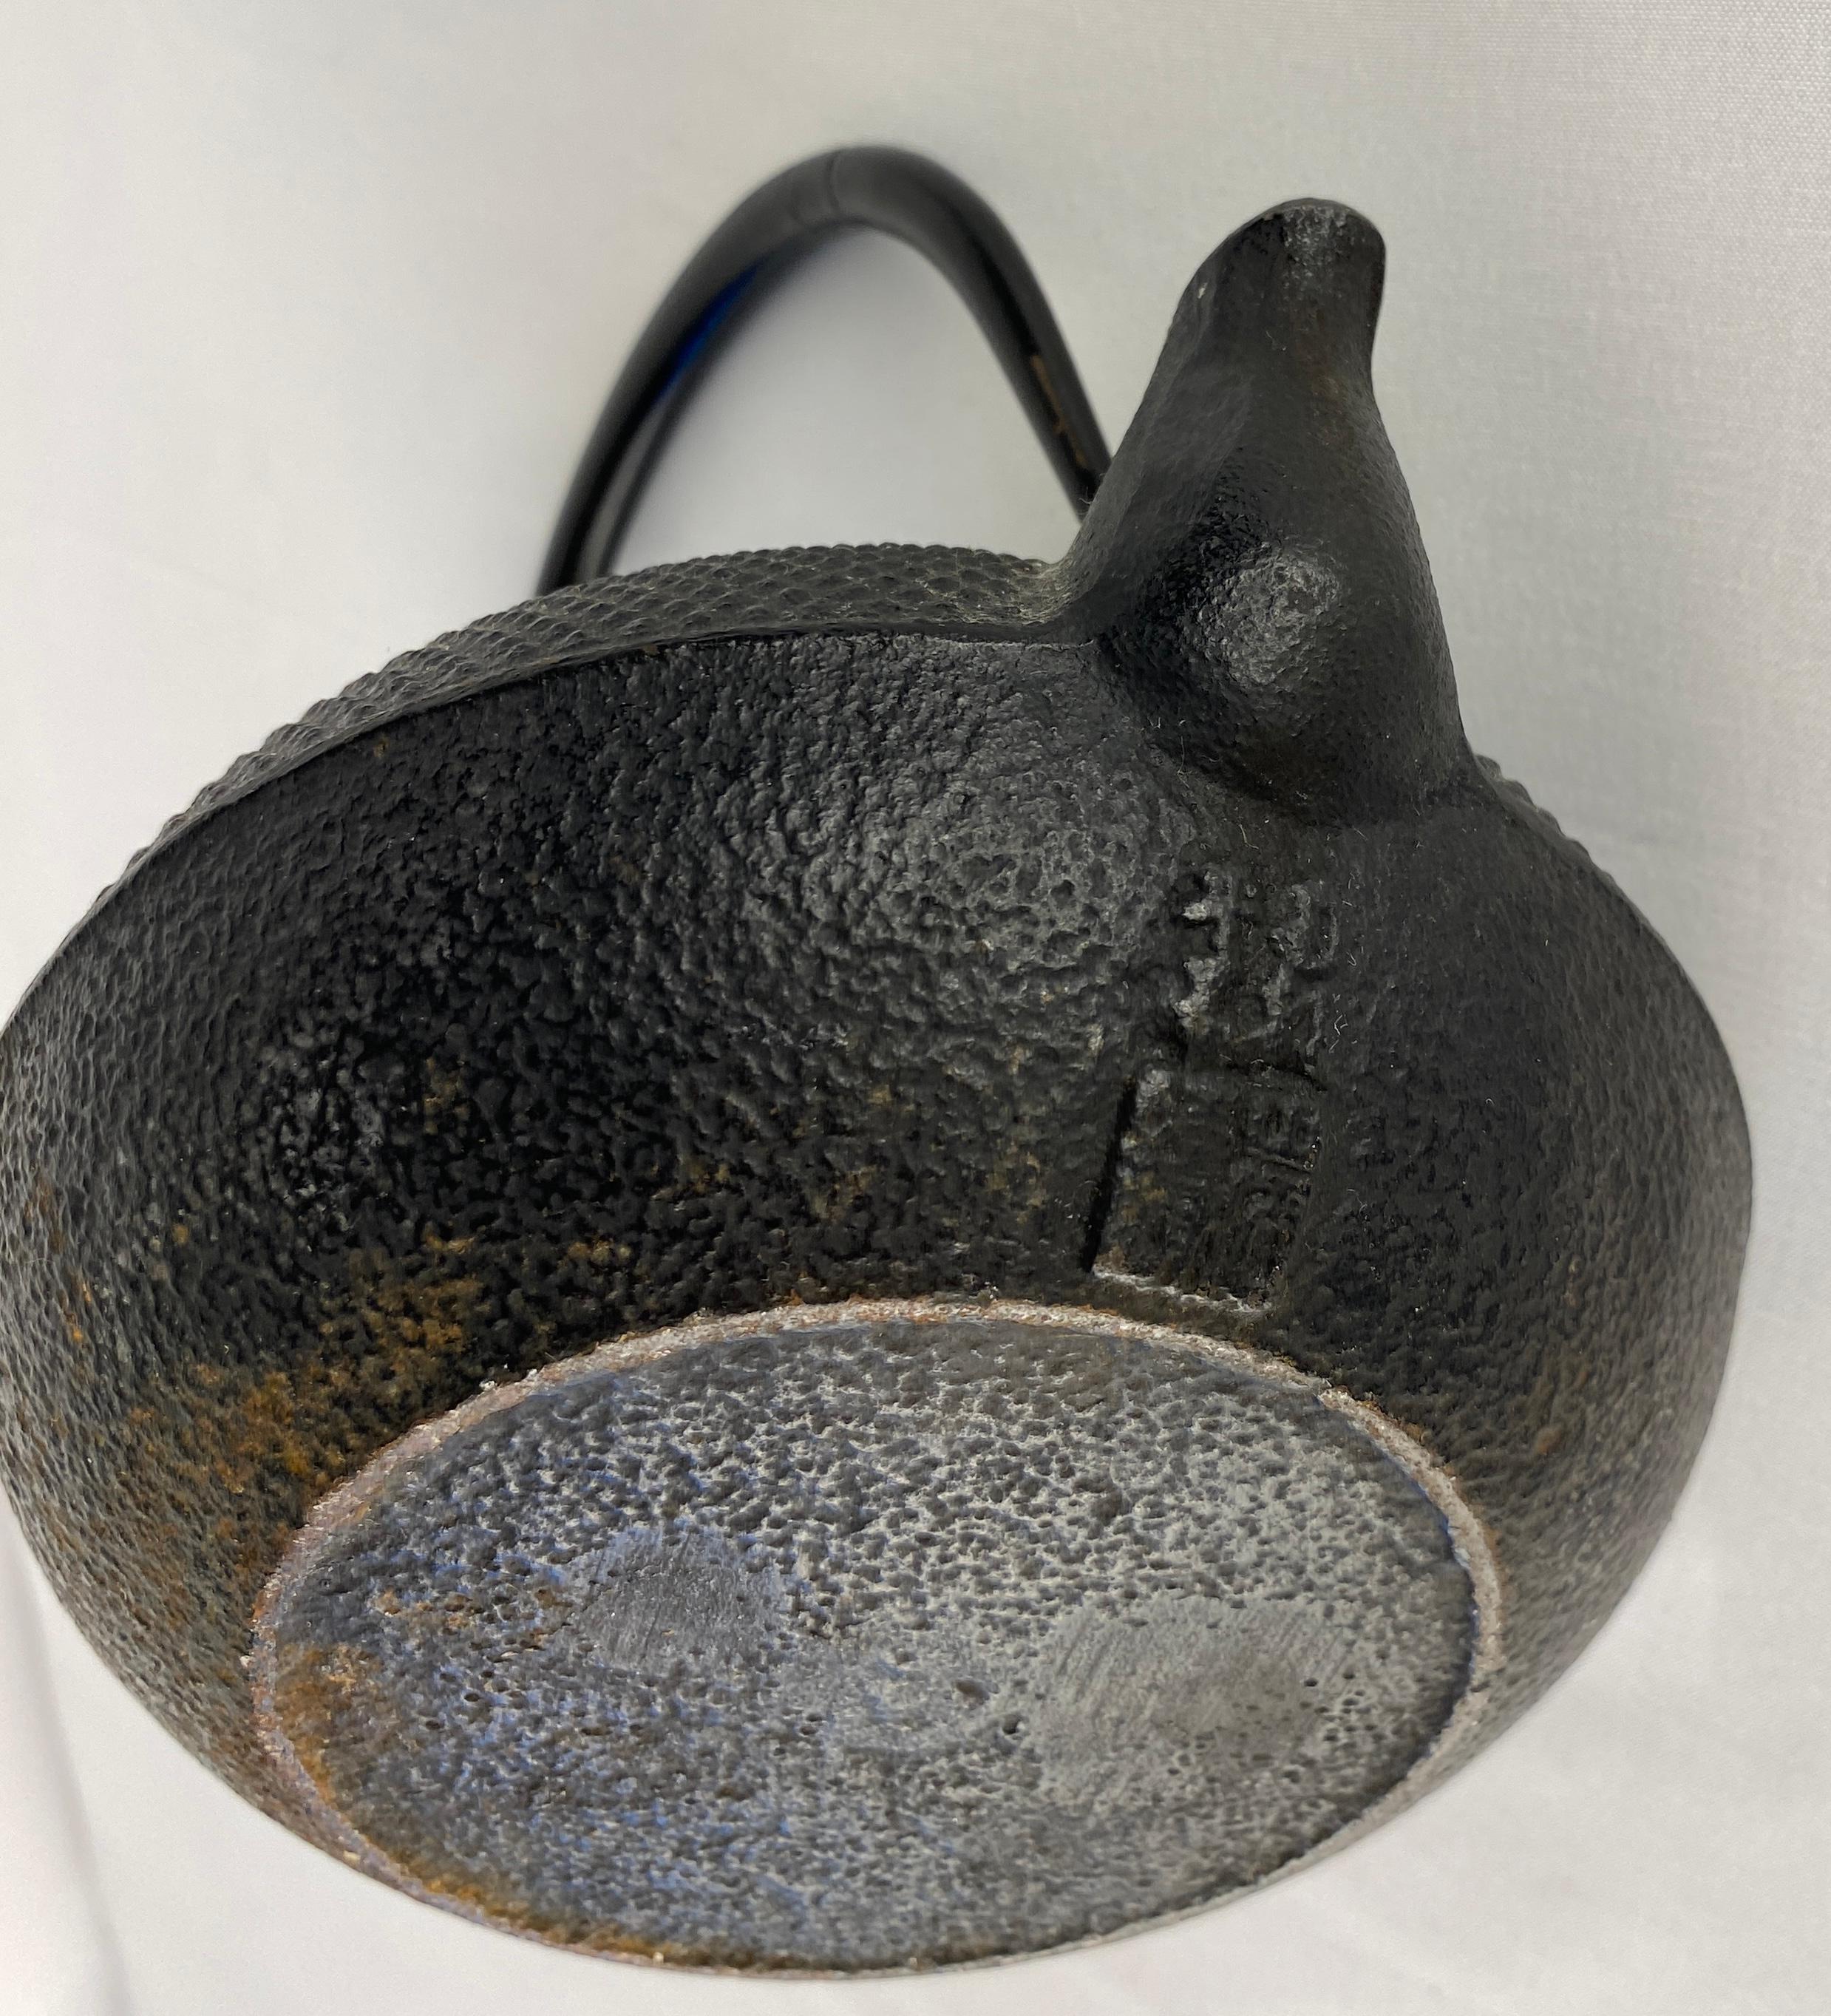 Vintage Tetsubin Japanese iron kettle in perfect antique condition. It would make a great display piece or could be put to immediate use. Strong and sturdy this piece has no fractures or leaks but has a very visually appealing amount of natural